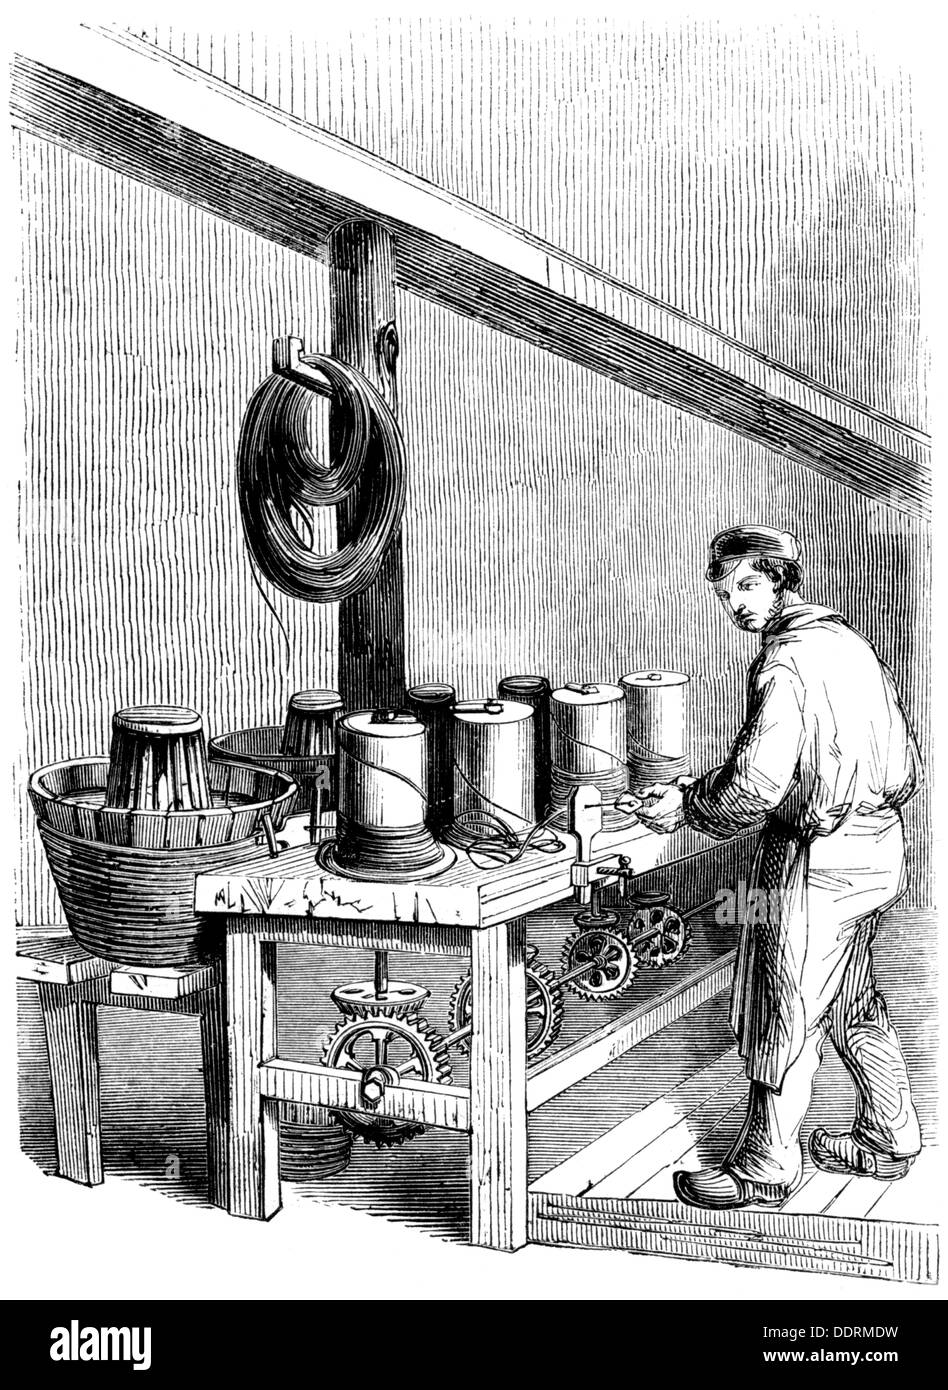 industry, tools, needles, production, wire drawing, wood engraving, 'Magasin pittoresque', Paris, circa 1865, Additional-Rights-Clearences-Not Available Stock Photo